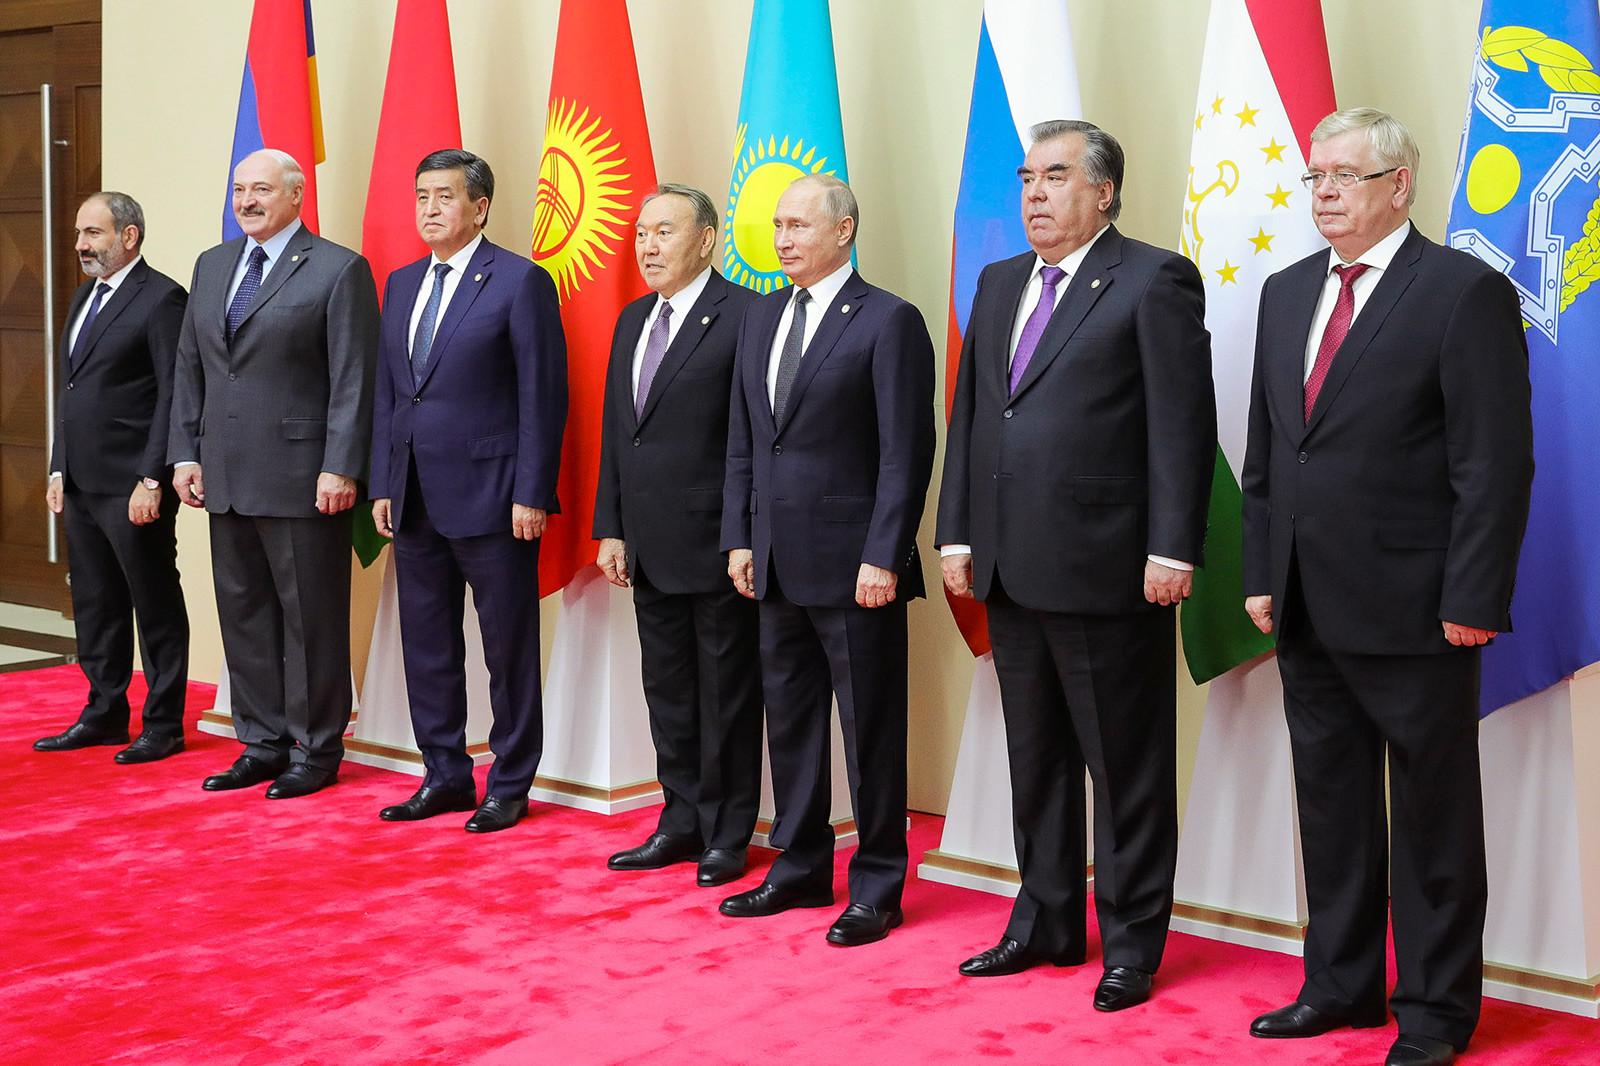 Leaders of the CSTO countries posing for a picture during a summit.